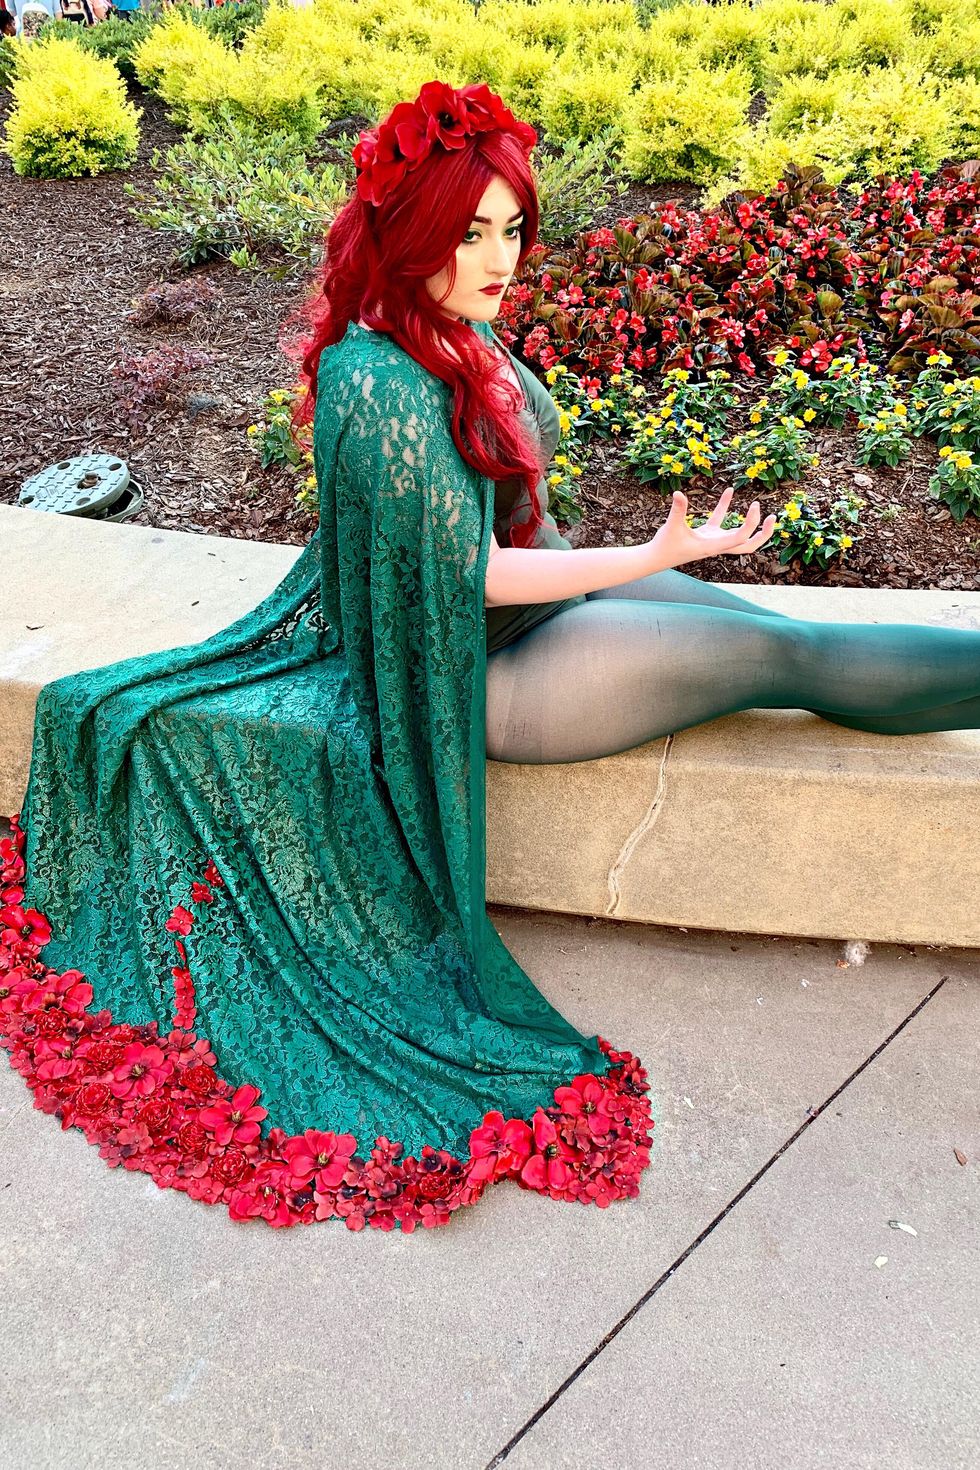 Poison Ivy Full Costume/ Green Ivy Cosplay 